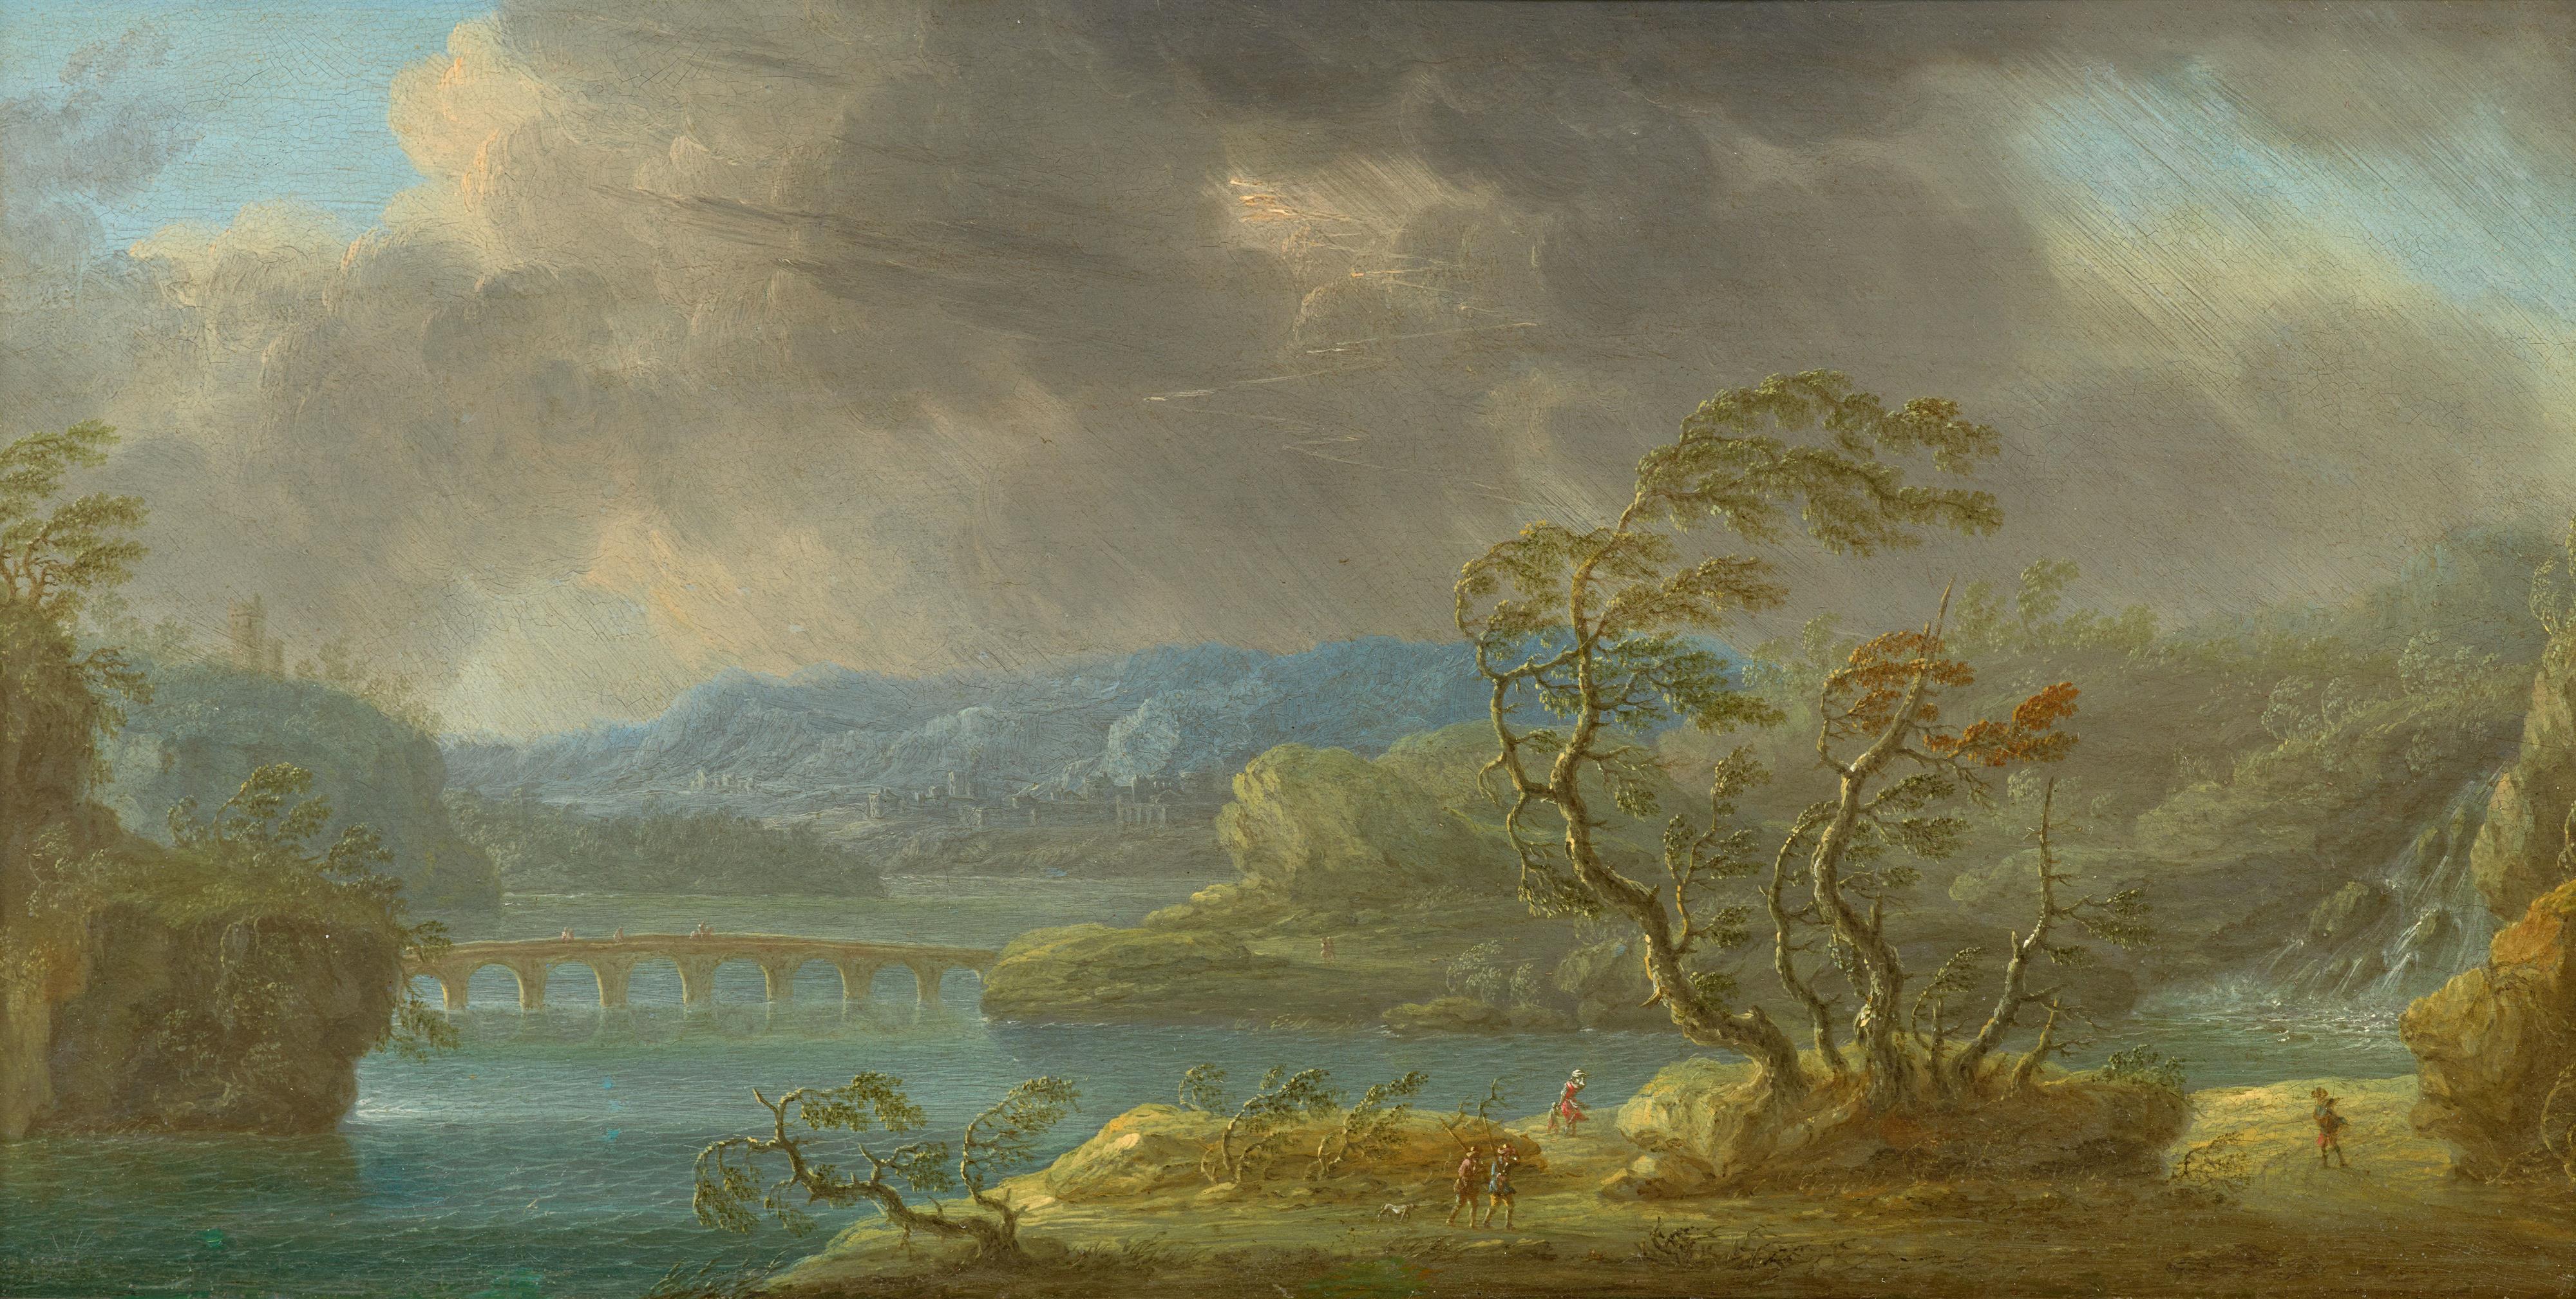 Orazio Grevenbroeck - View of a Southern Harbour

Southern Landscape with River and Bridge in Stormy Weather - image-2